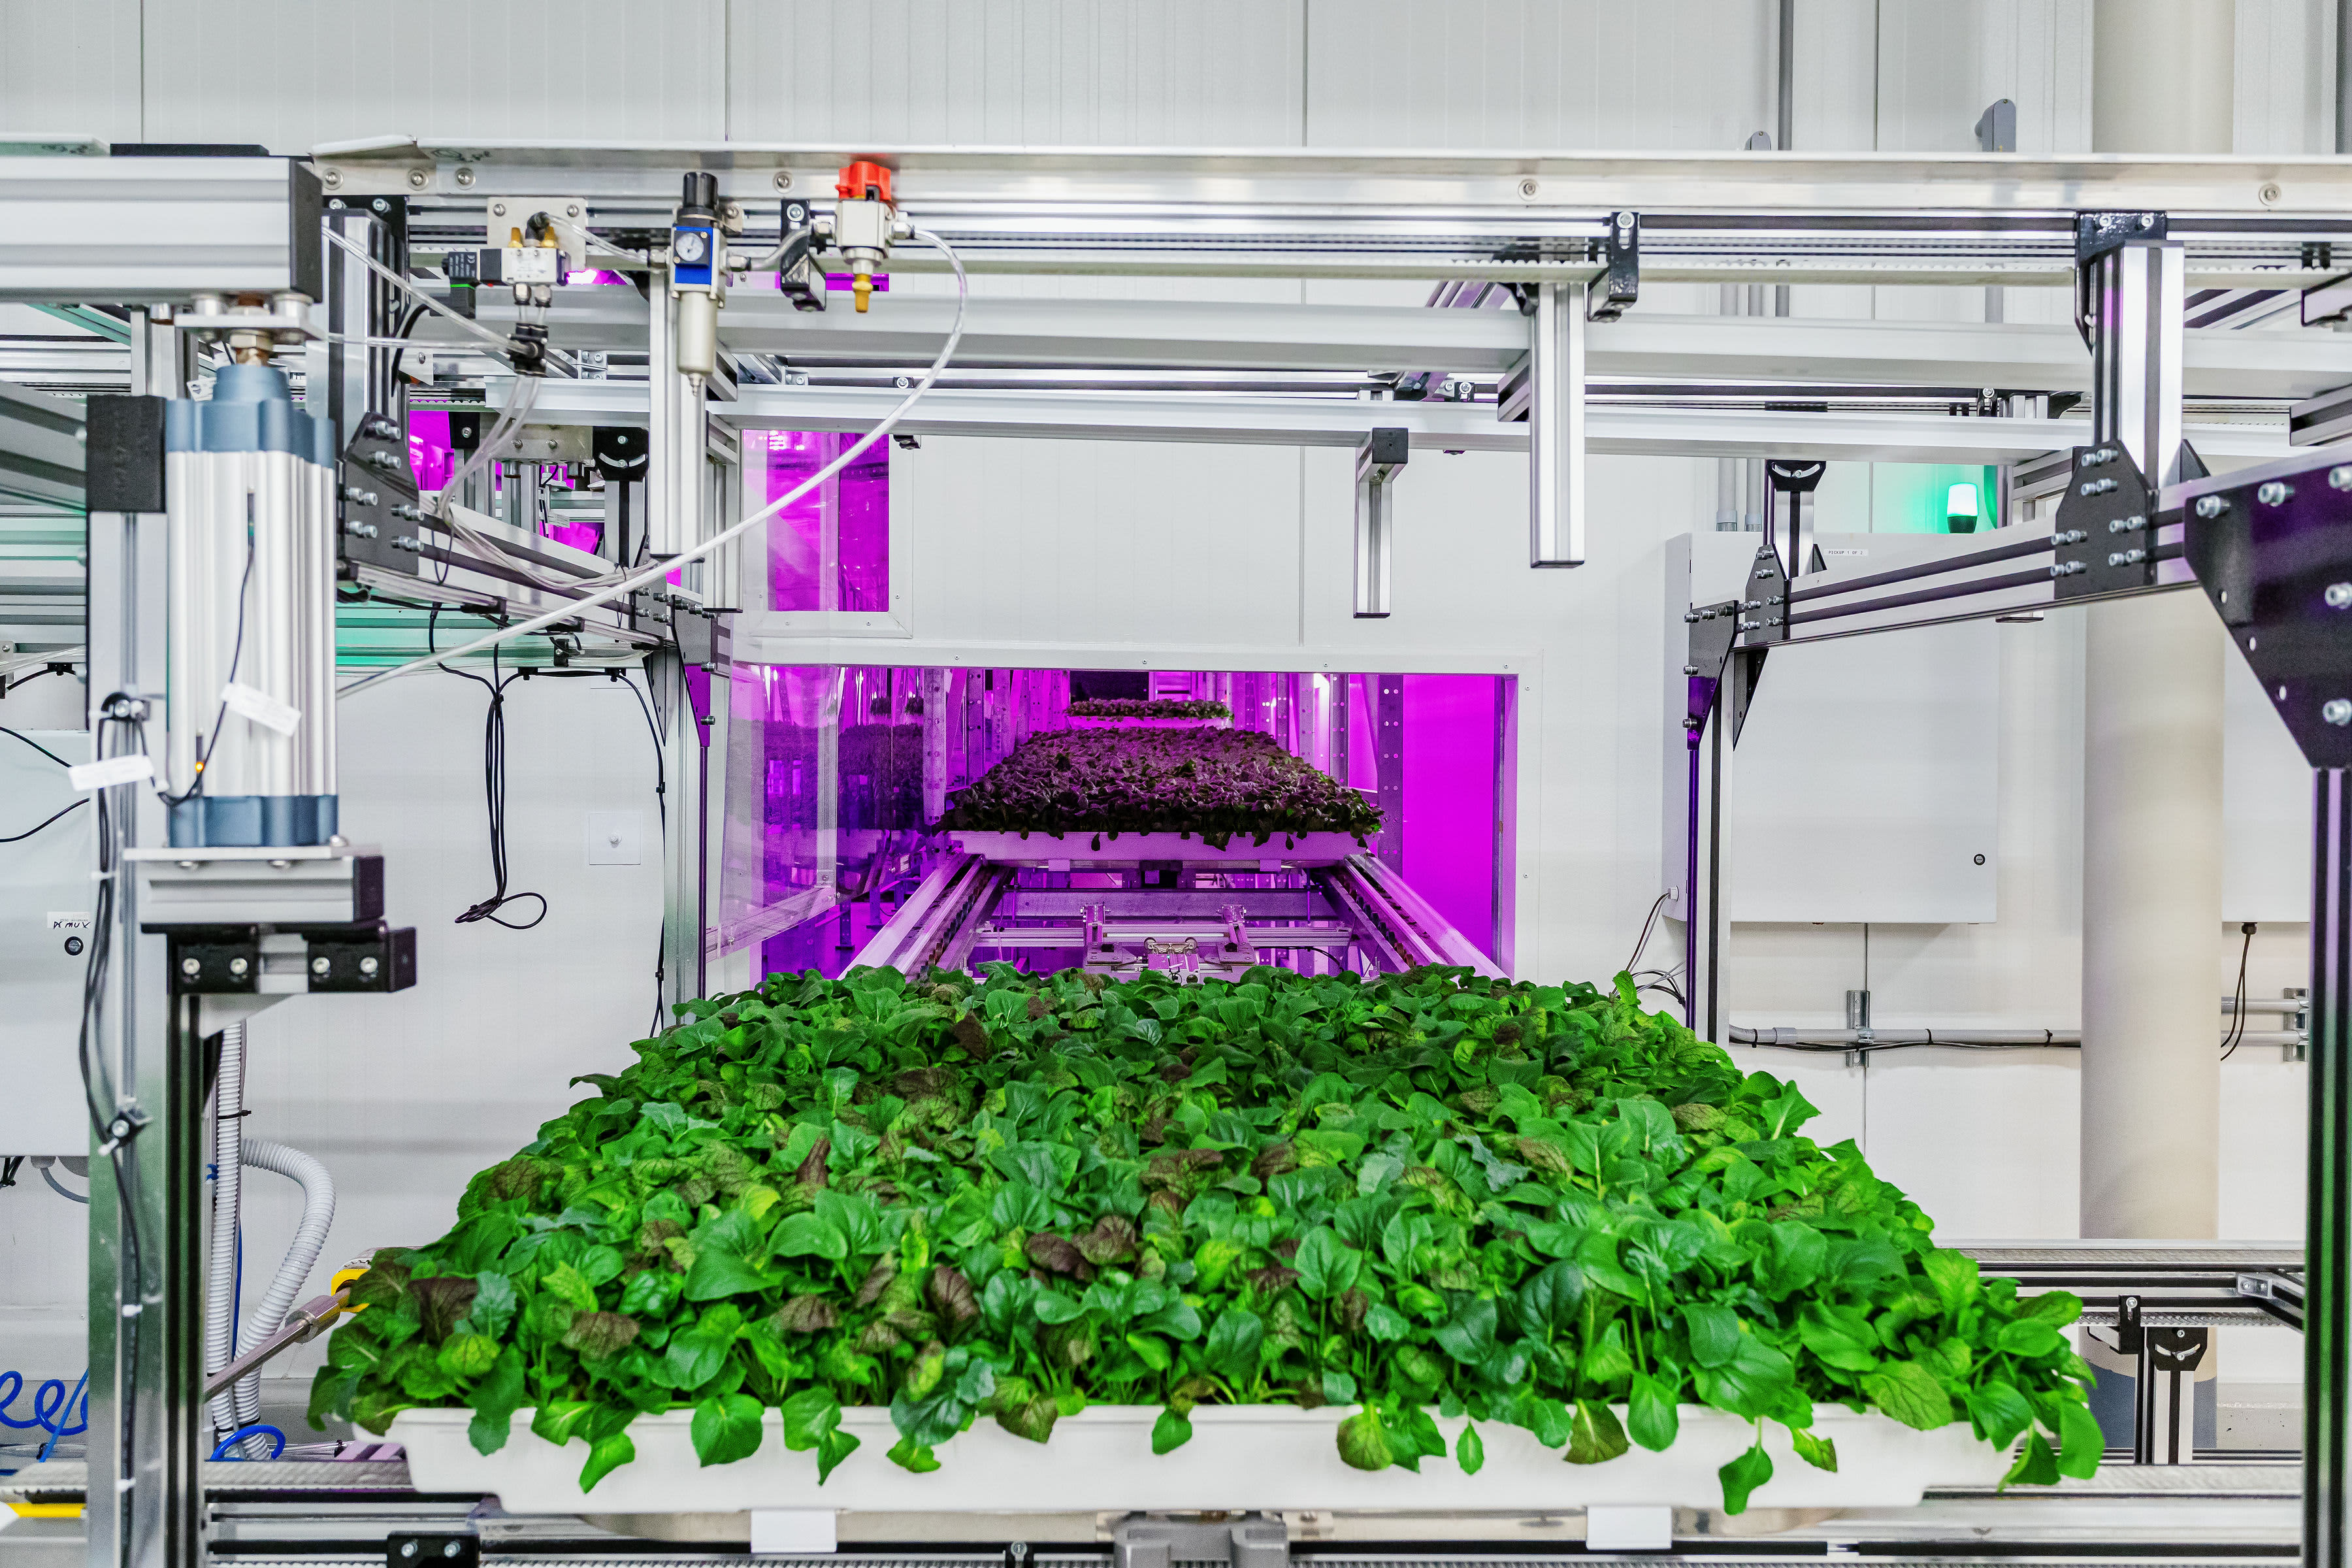 Next to the last steel mill in town, a robotic farm grows backed by Pritzker billions